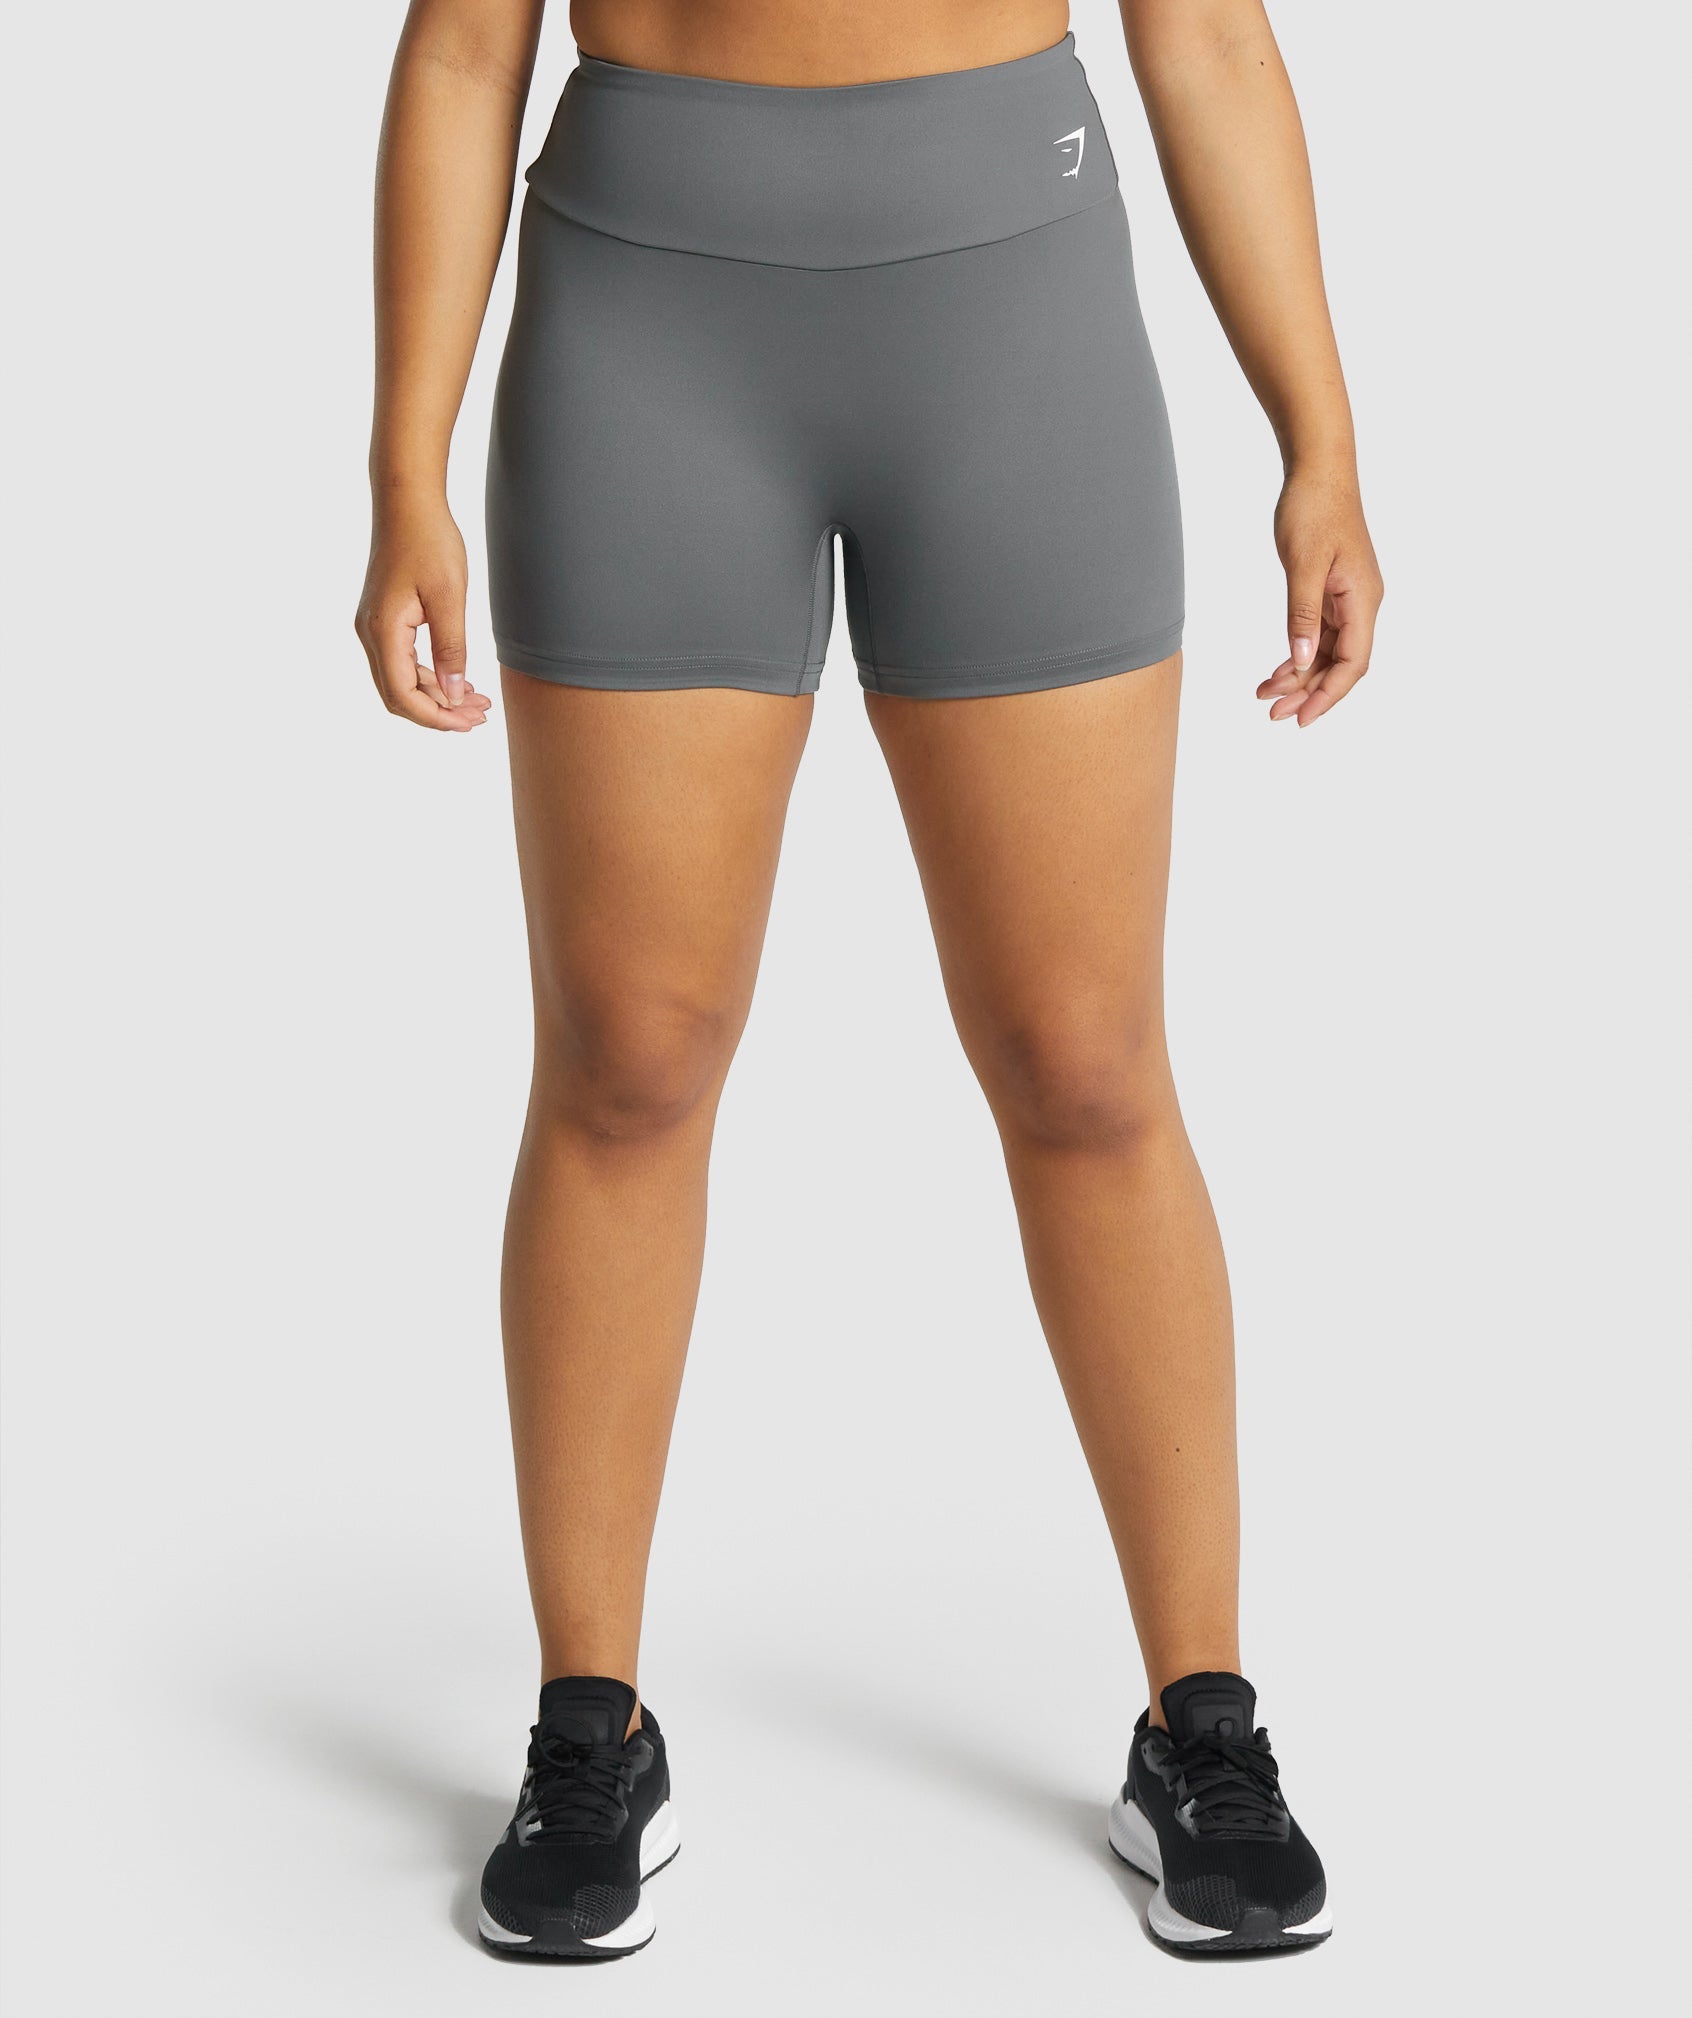 Gymshark Seamless Charcoal Grey Womens Fit Cycling Shorts GLSH4279